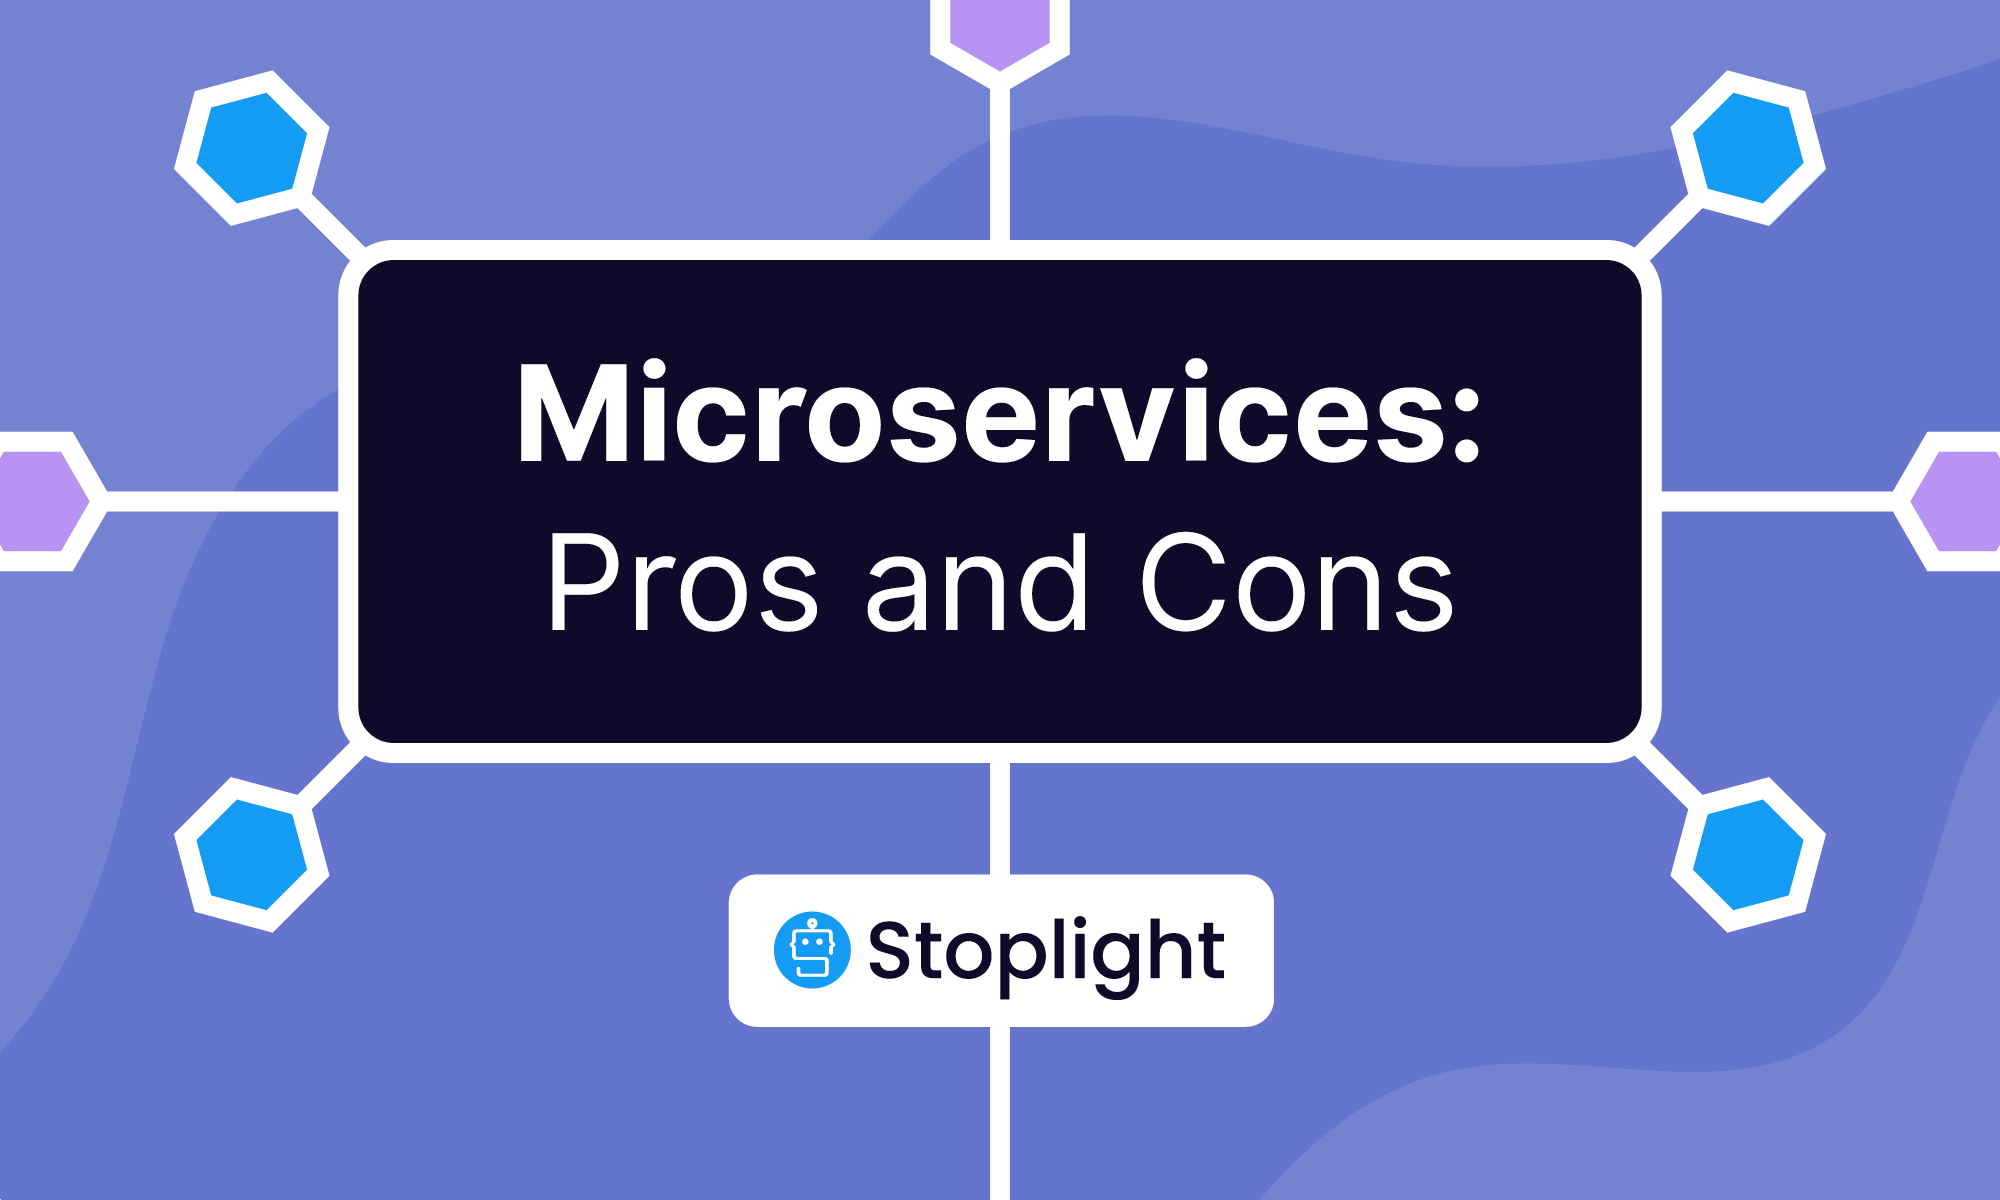 Microservices: Pros and Cons